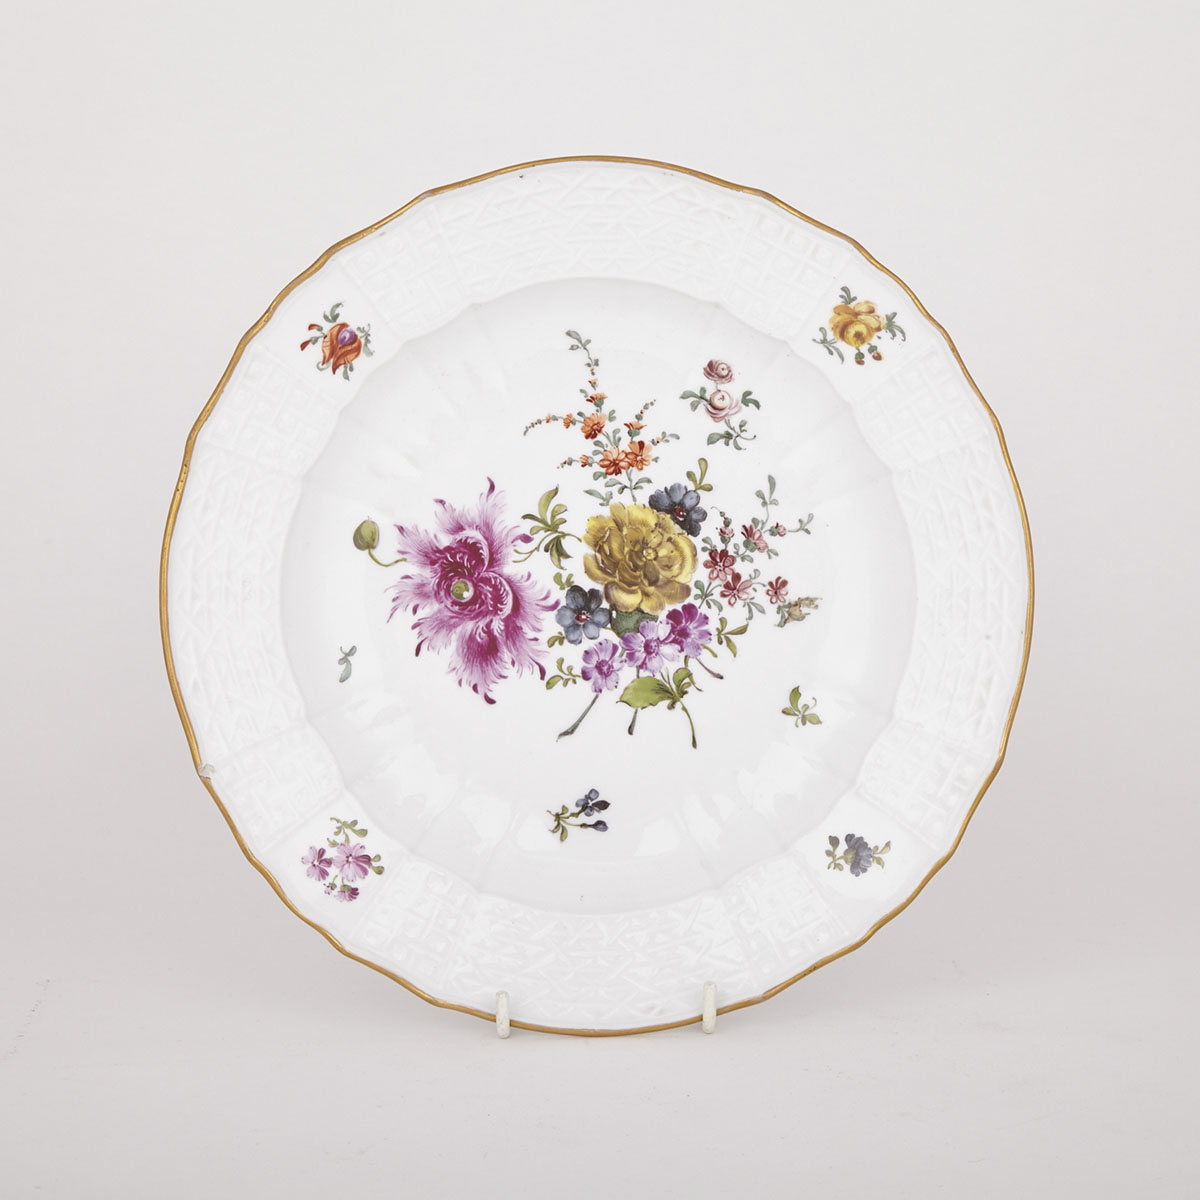 Meissen Moulded and Flower-Painted Plate, 19th century